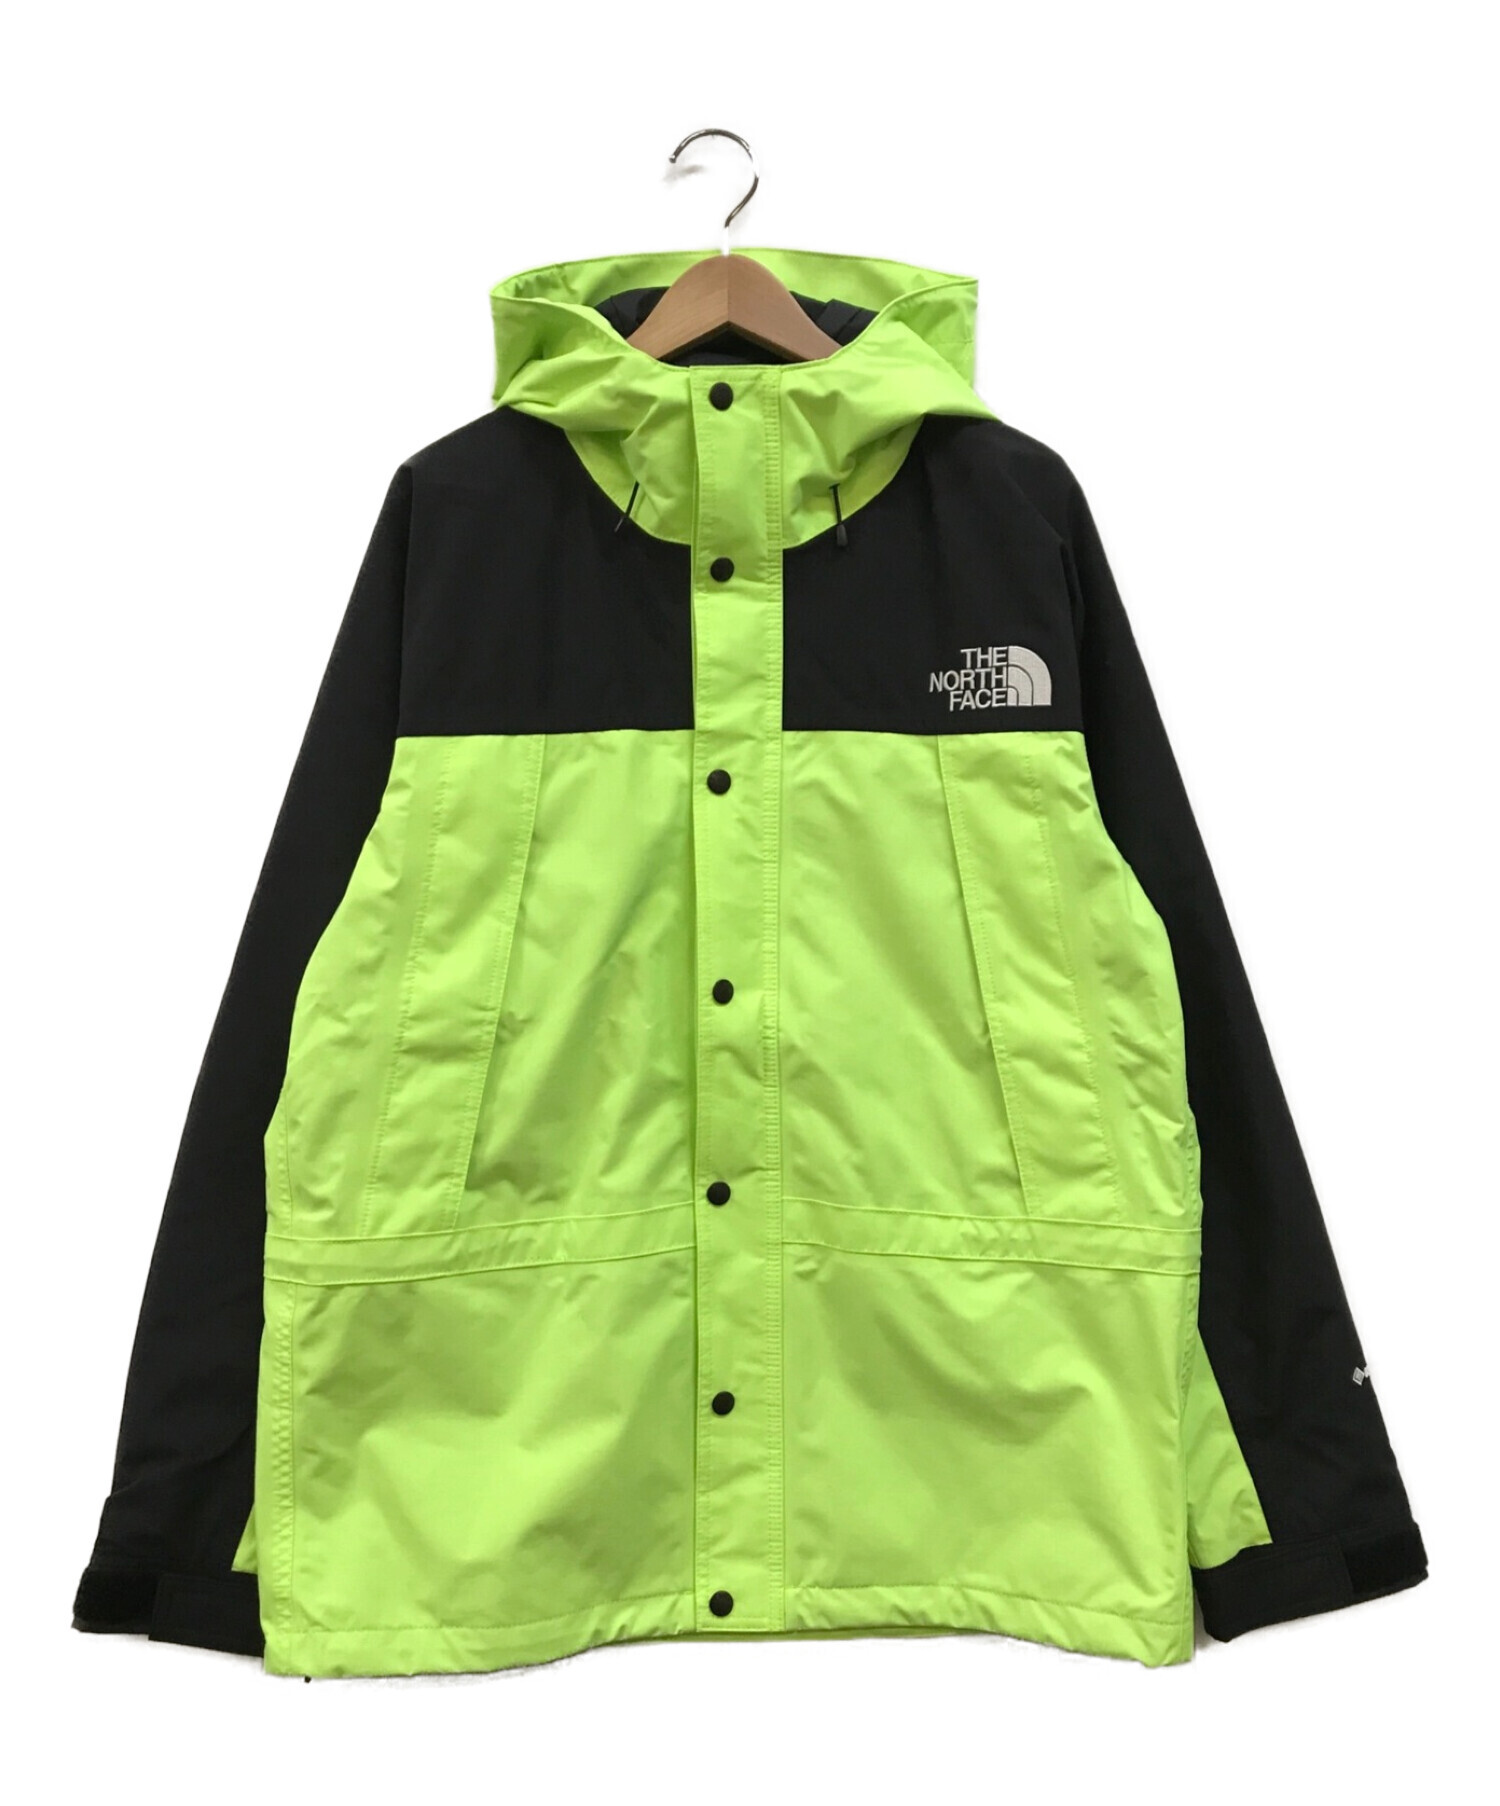 THE NORTH  FACE Mountain Light Jacket XL